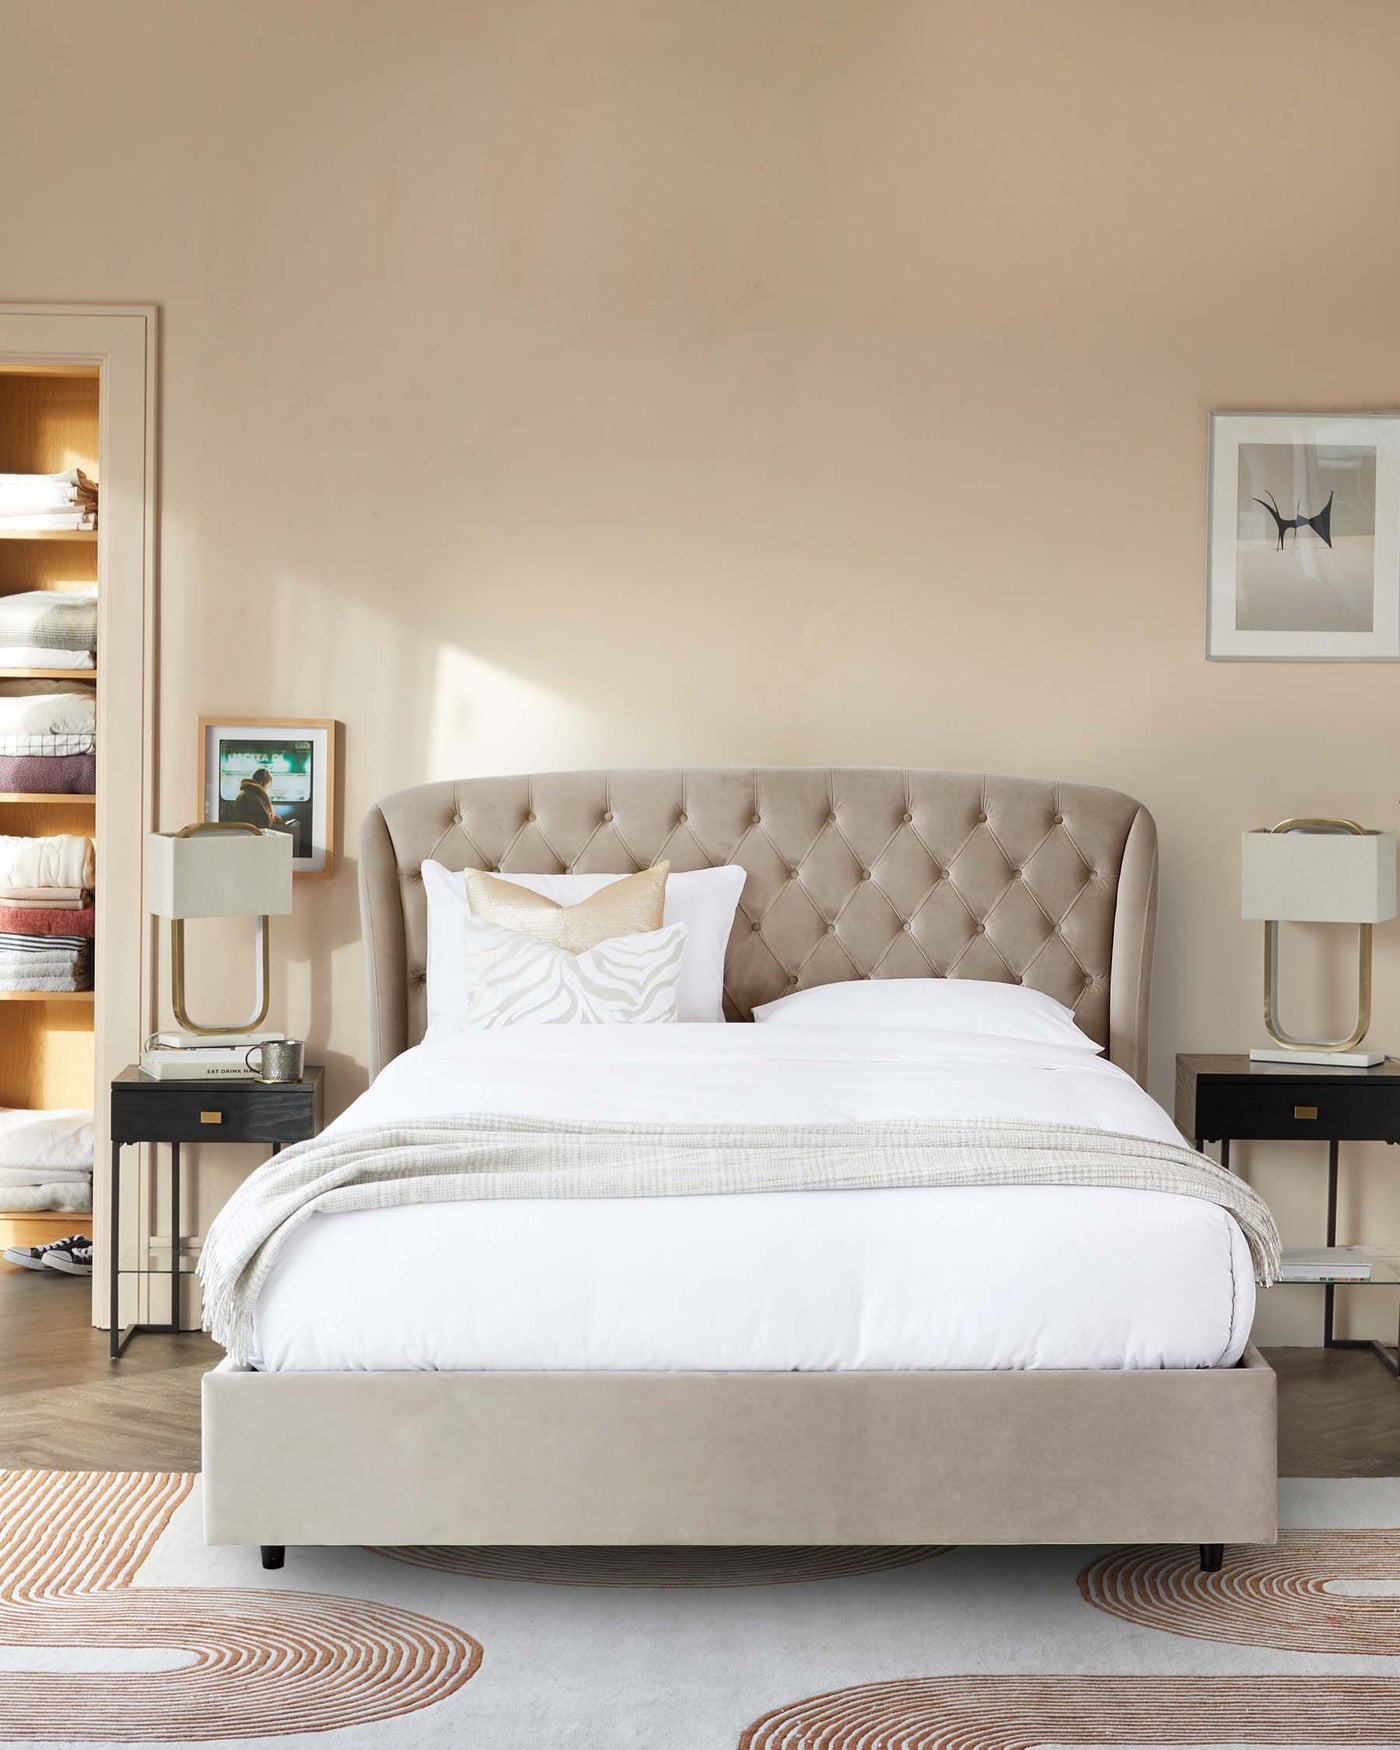 Elegant bedroom featuring a plush, tufted headboard on a large, neutral-toned upholstered bed. Coordinating nightstands with sleek, black frames and clear glass lamps flank the bed, creating a symmetrical, upscale look.